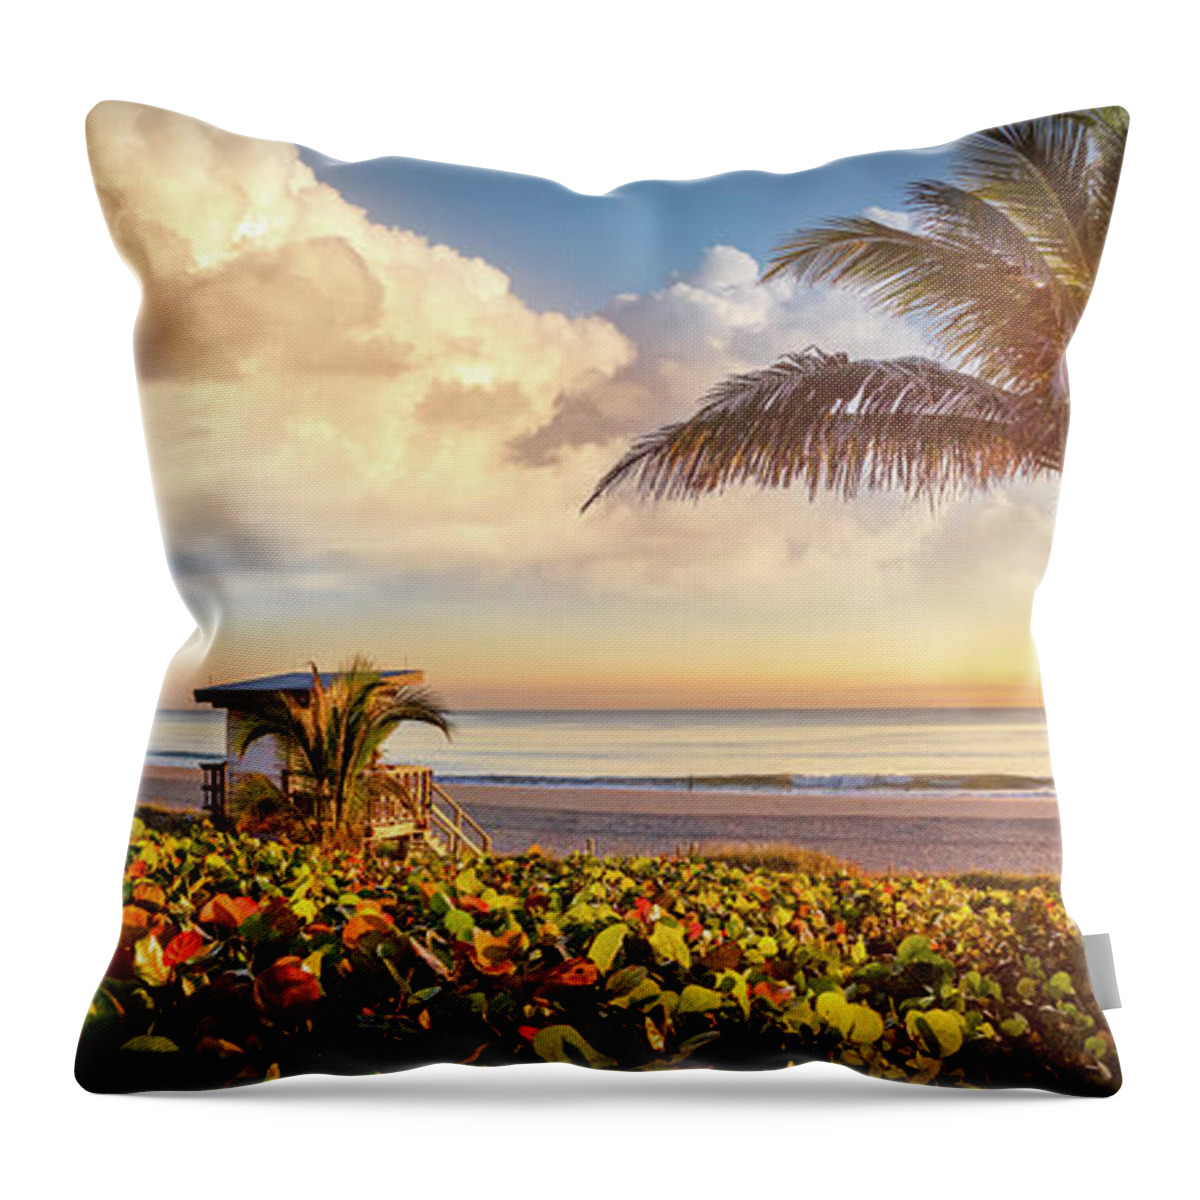 Panorama Throw Pillow featuring the photograph Sunrise View Panorama by Debra and Dave Vanderlaan